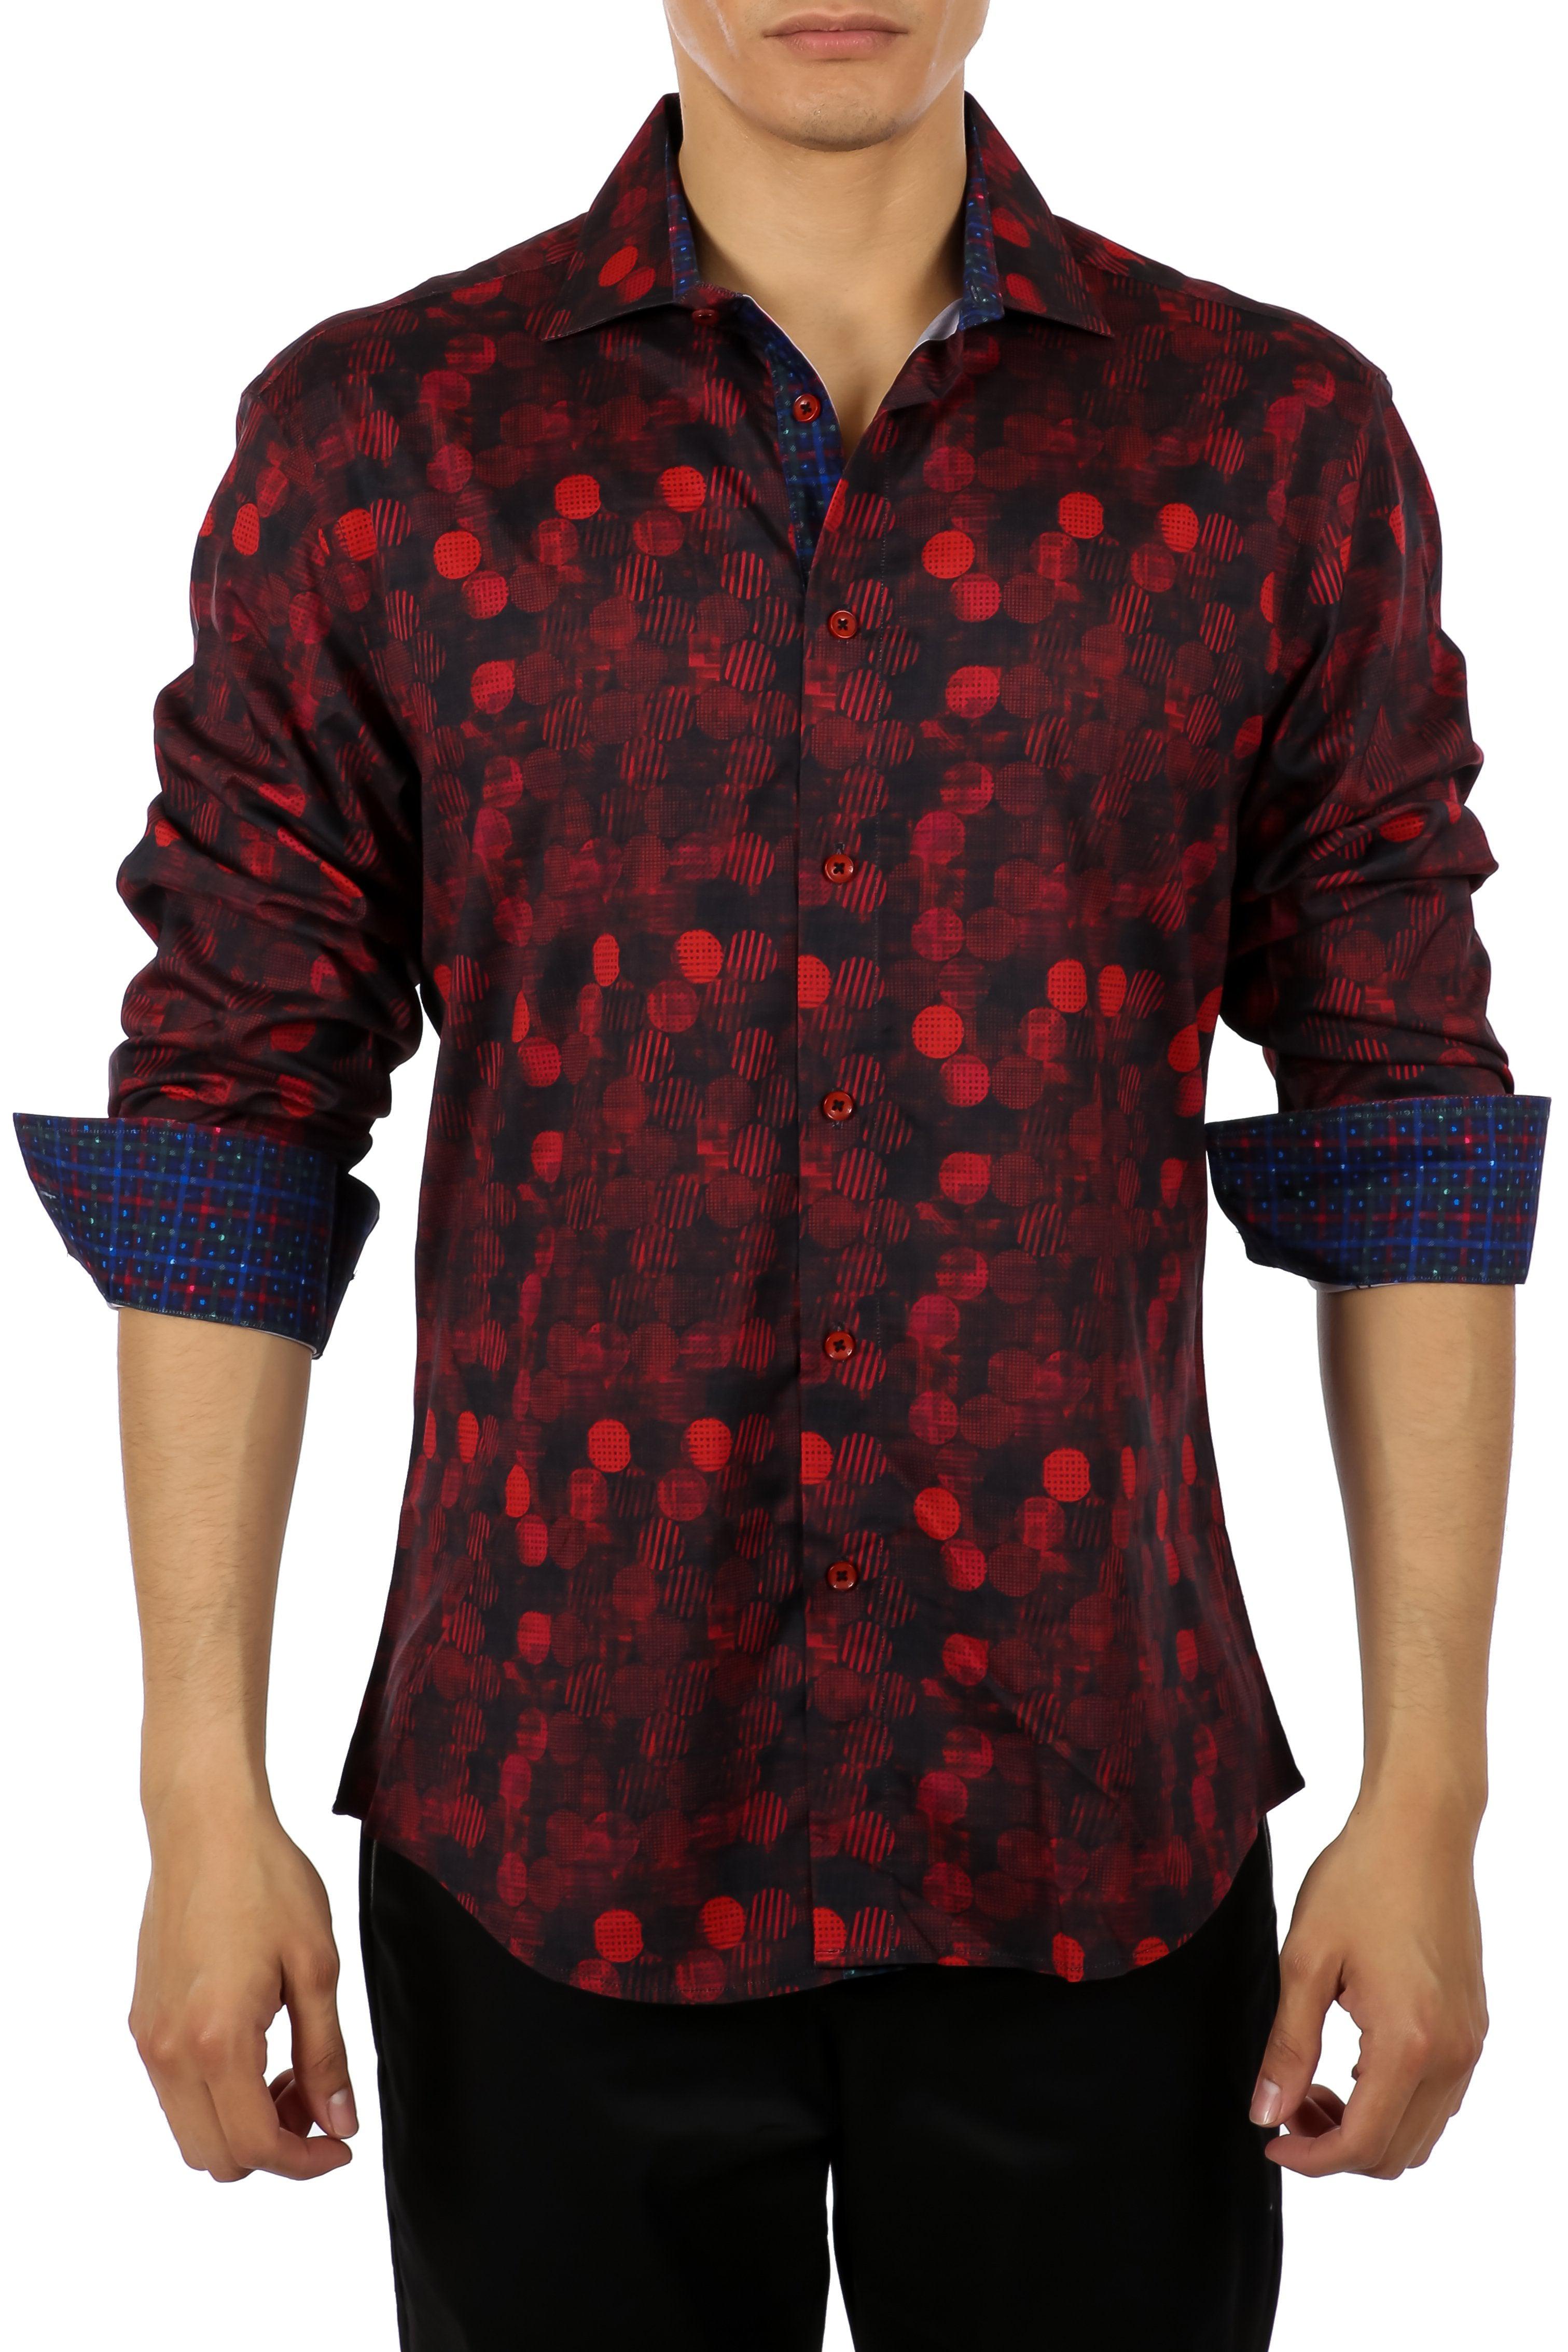 Polo Shirt Contrast Checkered Pattern Printed Red by Bespoke Moda in Size XL